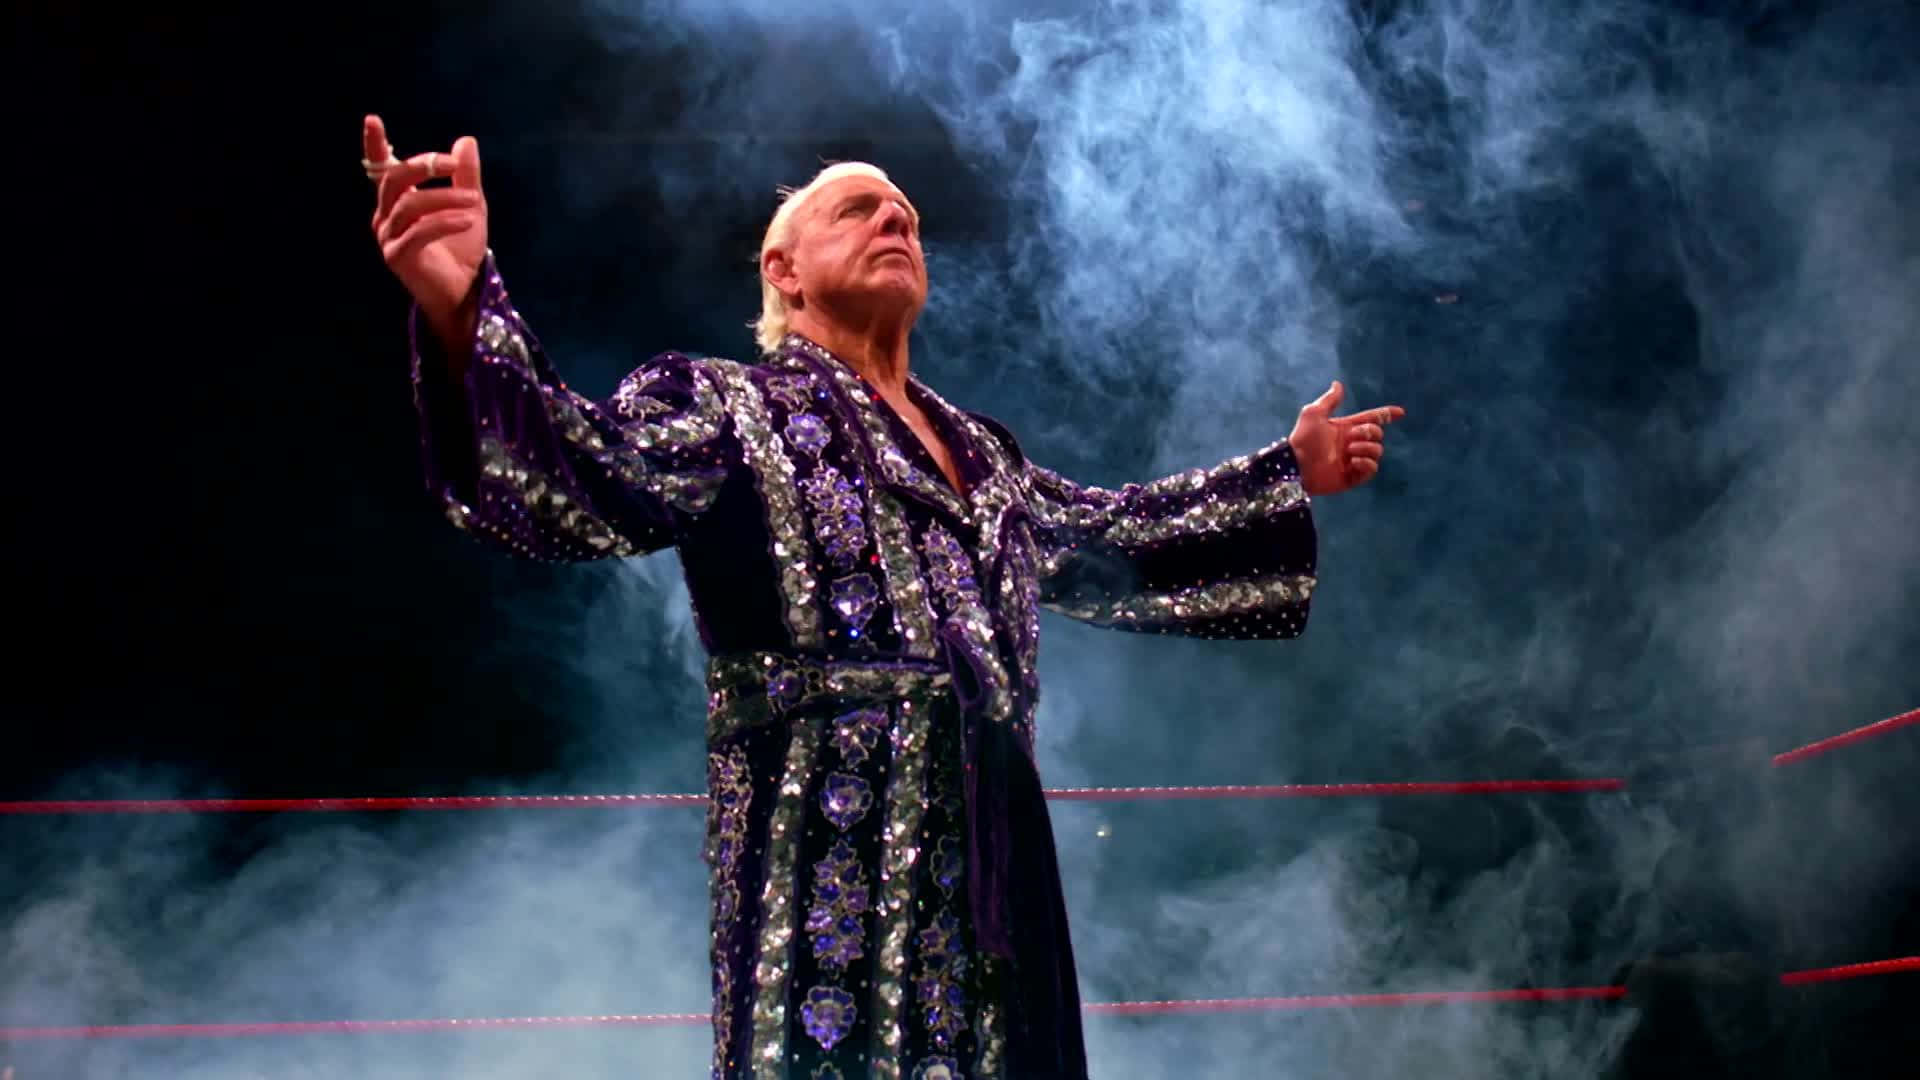 Iconic Wrestler Ric Flair In Espn's 30 For 30 Series